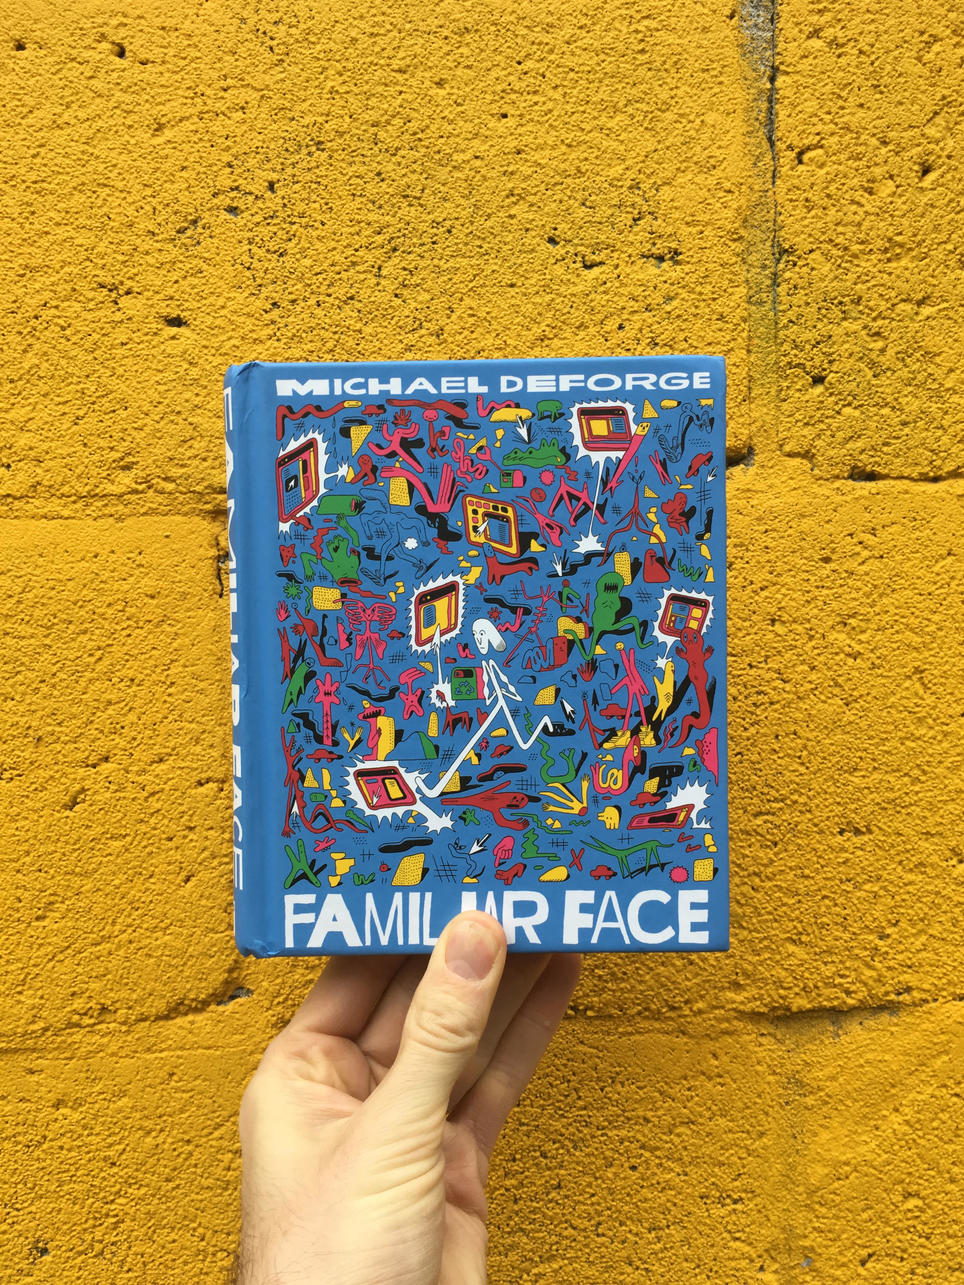 New D+Q: Familiar Face by Michael Deforge is officially out now!